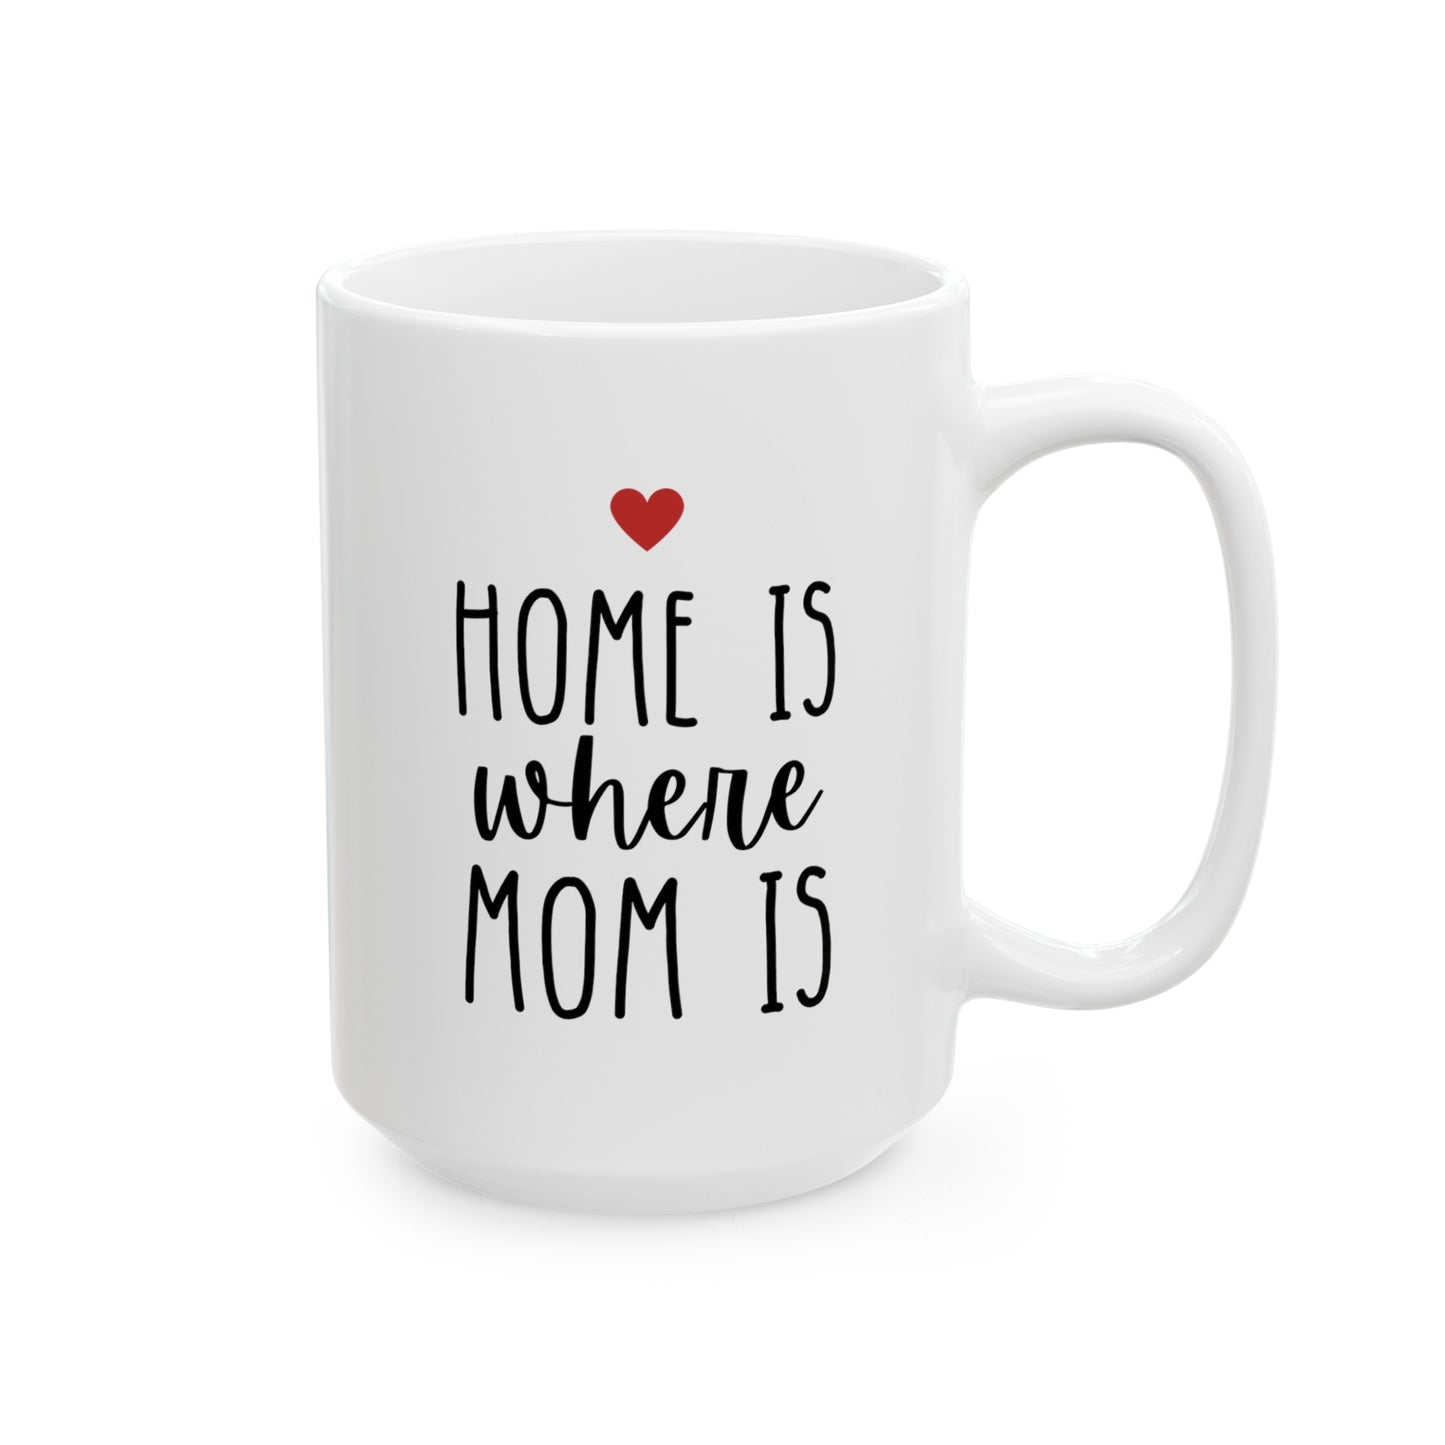 Home Is Where Mom Is 15oz white funny large big coffee mug tea cup gift for mother's day moving states away housewarming long distance mum waveywares wavey wares wavywares wavy wares